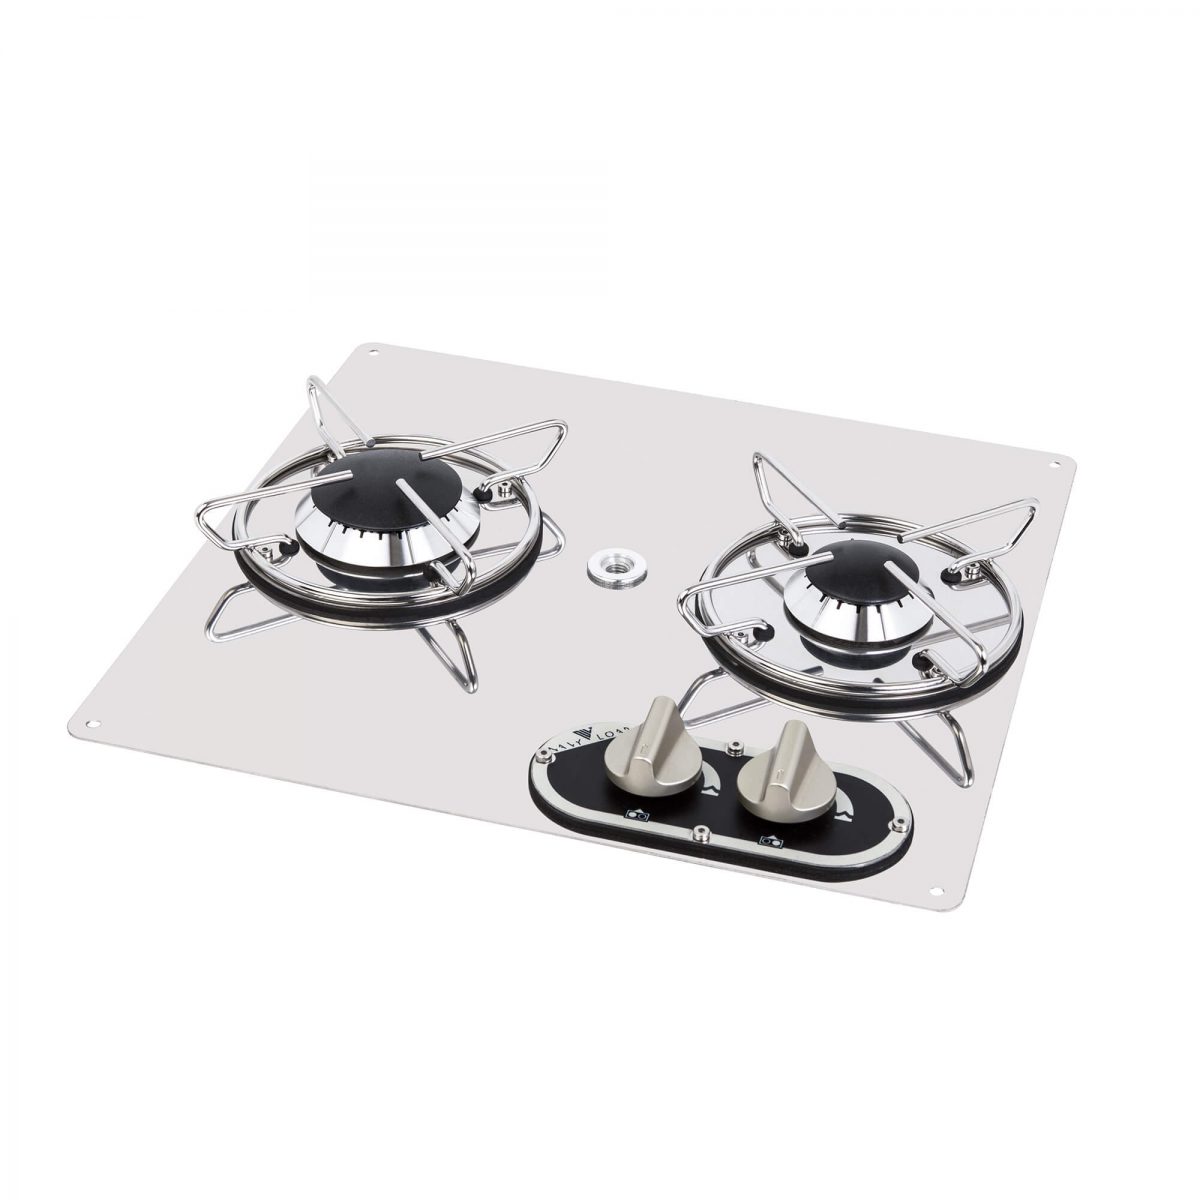 STAINLESS STEEL BUILT-IN HOB UNIT , 2 BURNERS   380×360